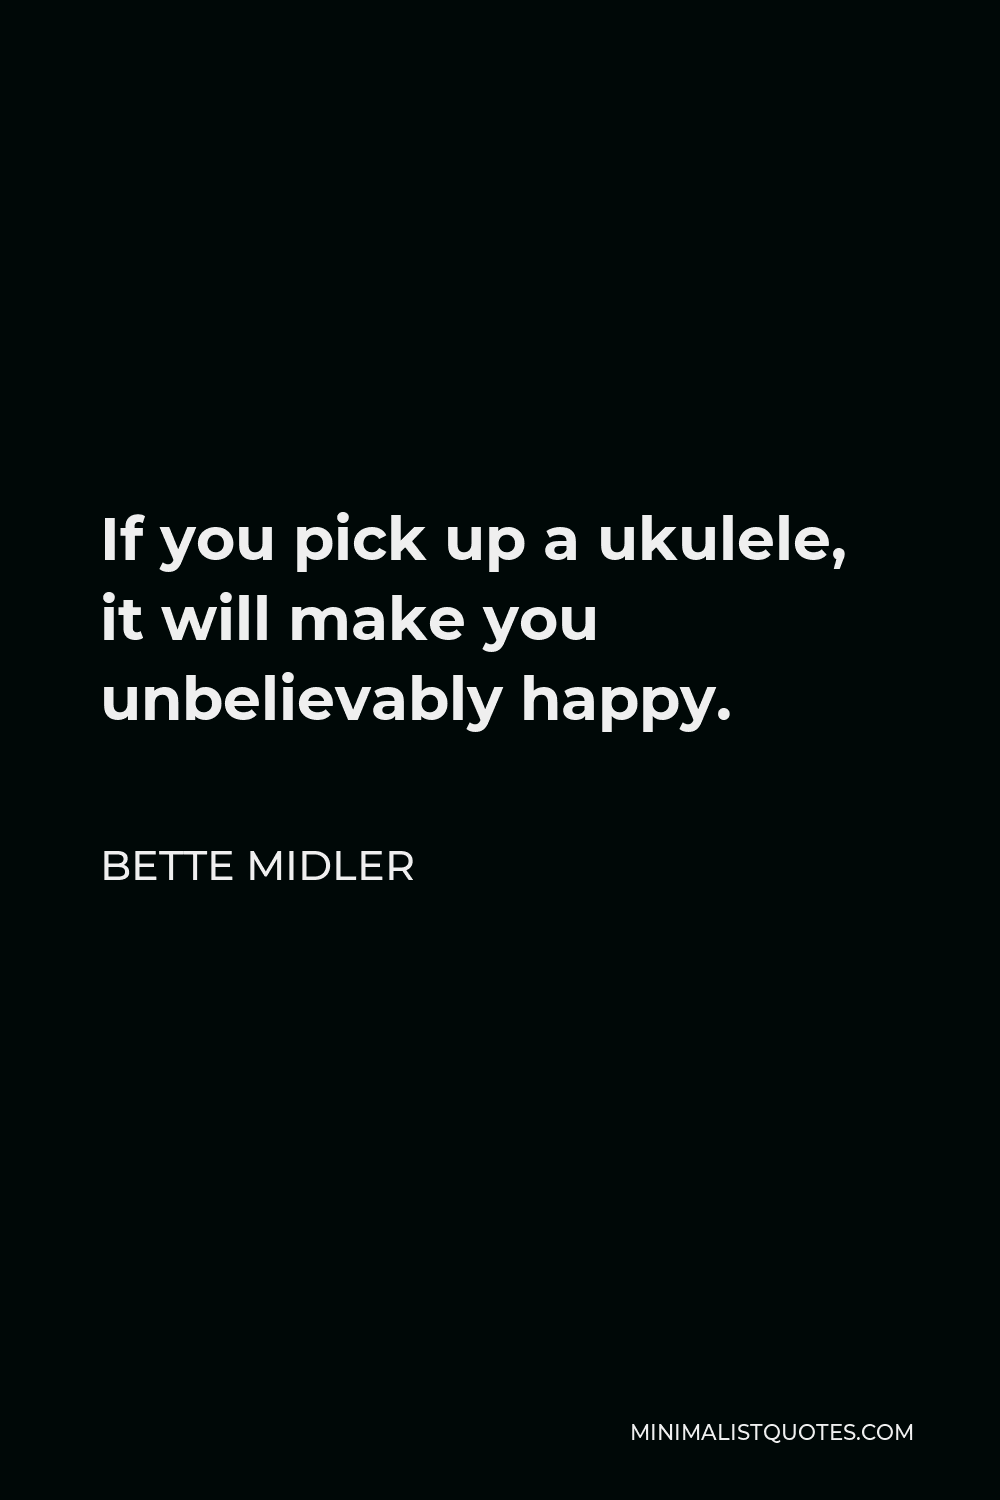 Bette Midler Quote - If you pick up a ukulele, it will make you unbelievably happy.